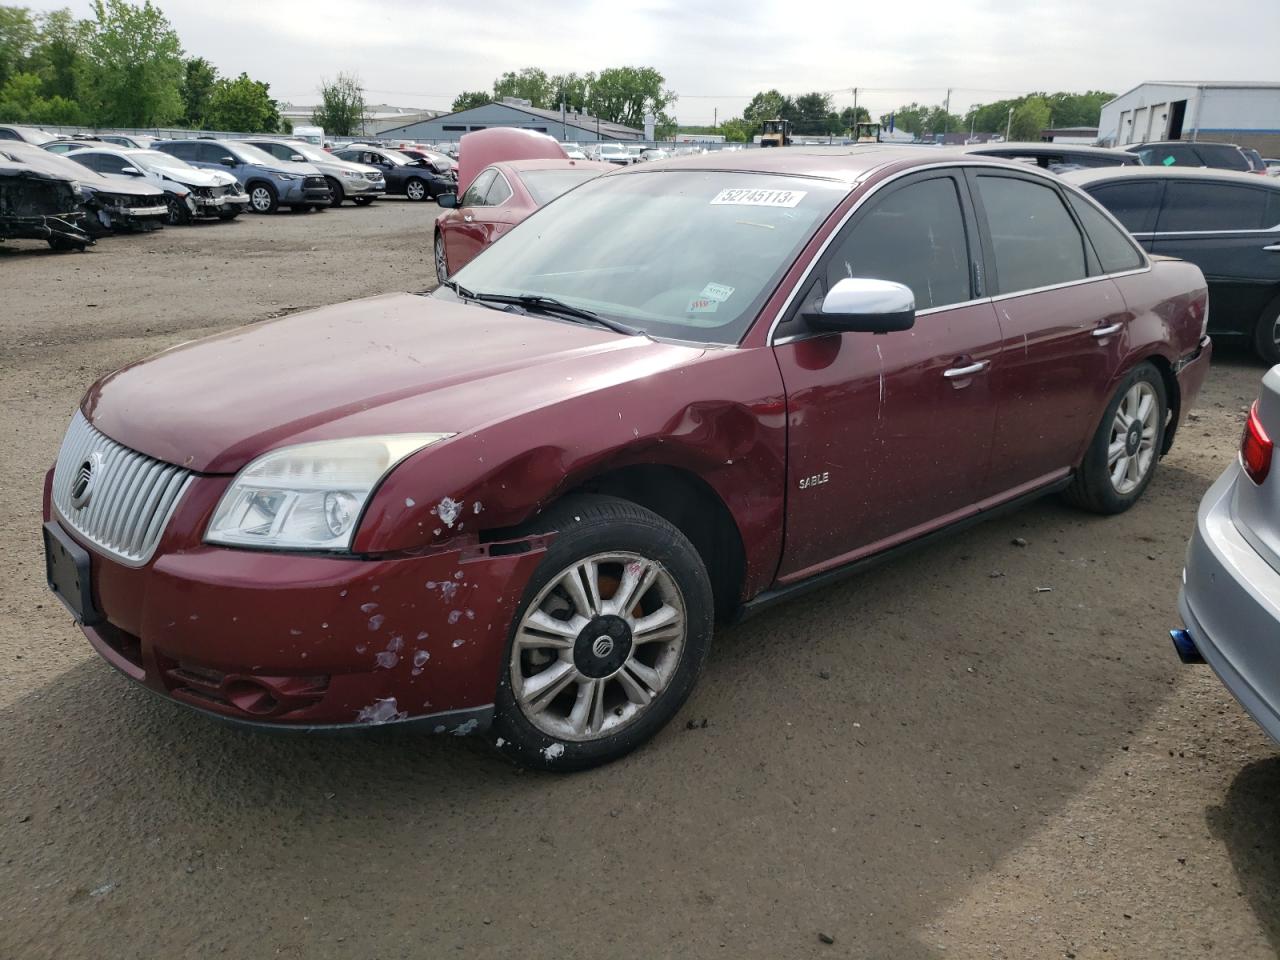 vin: 1MEHM42WX8G625846 1MEHM42WX8G625846 2008 mercury sable 3500 for Sale in 06051 4123, Ct - Hartford, New Britain, USA